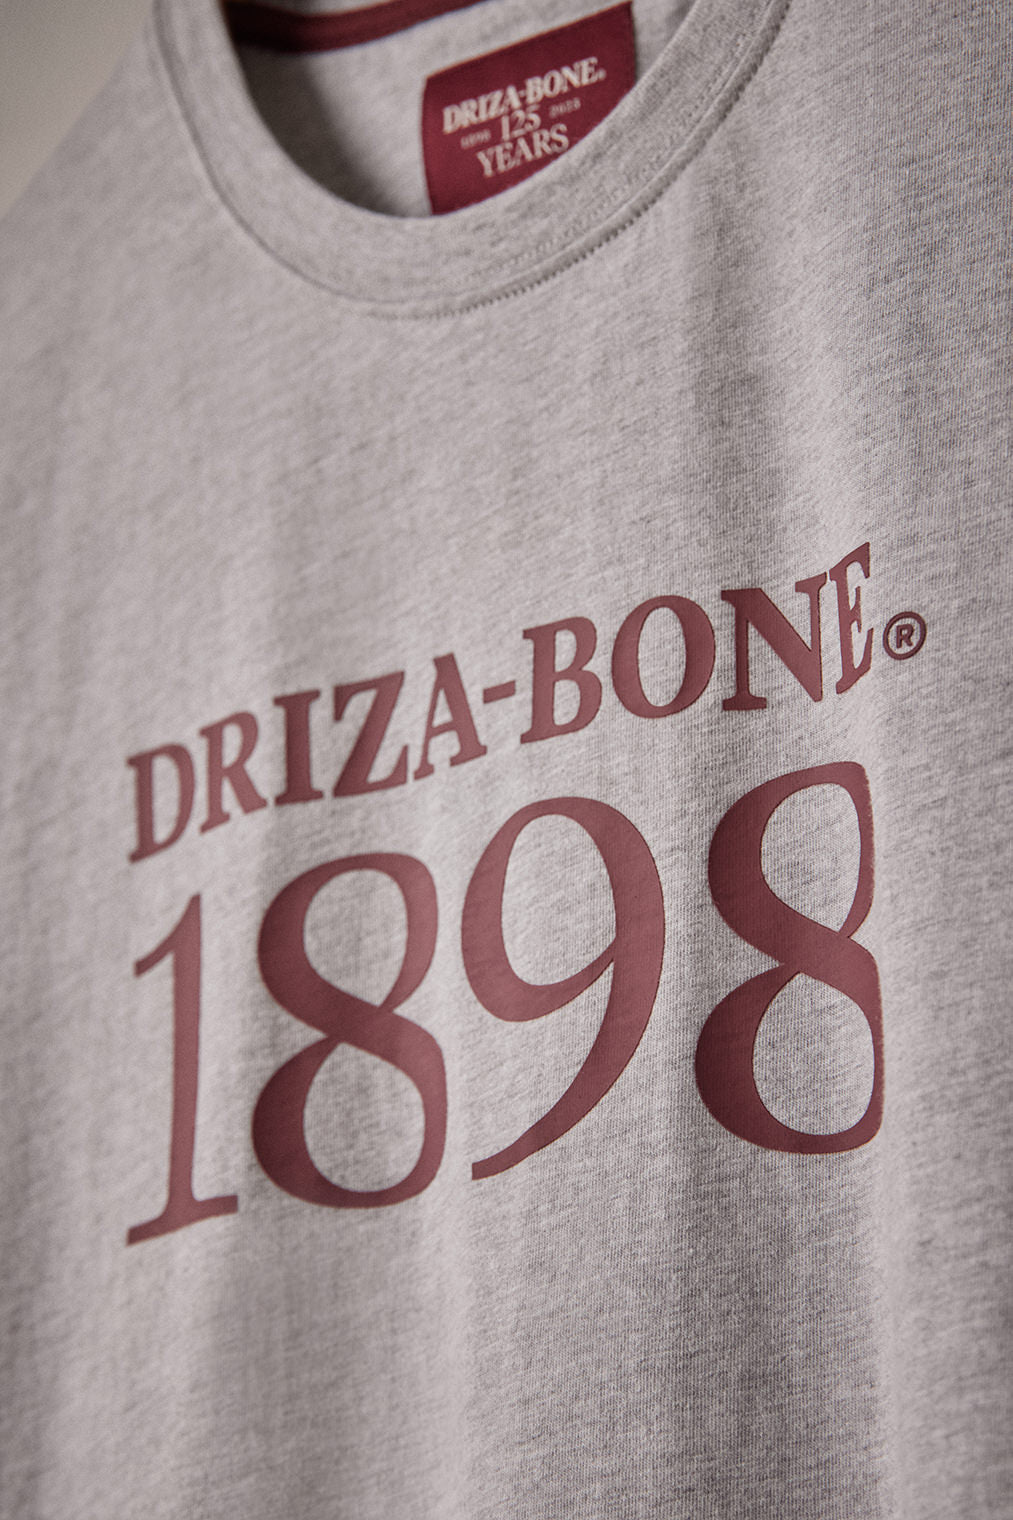 1898 LIMITED EDITION TEE